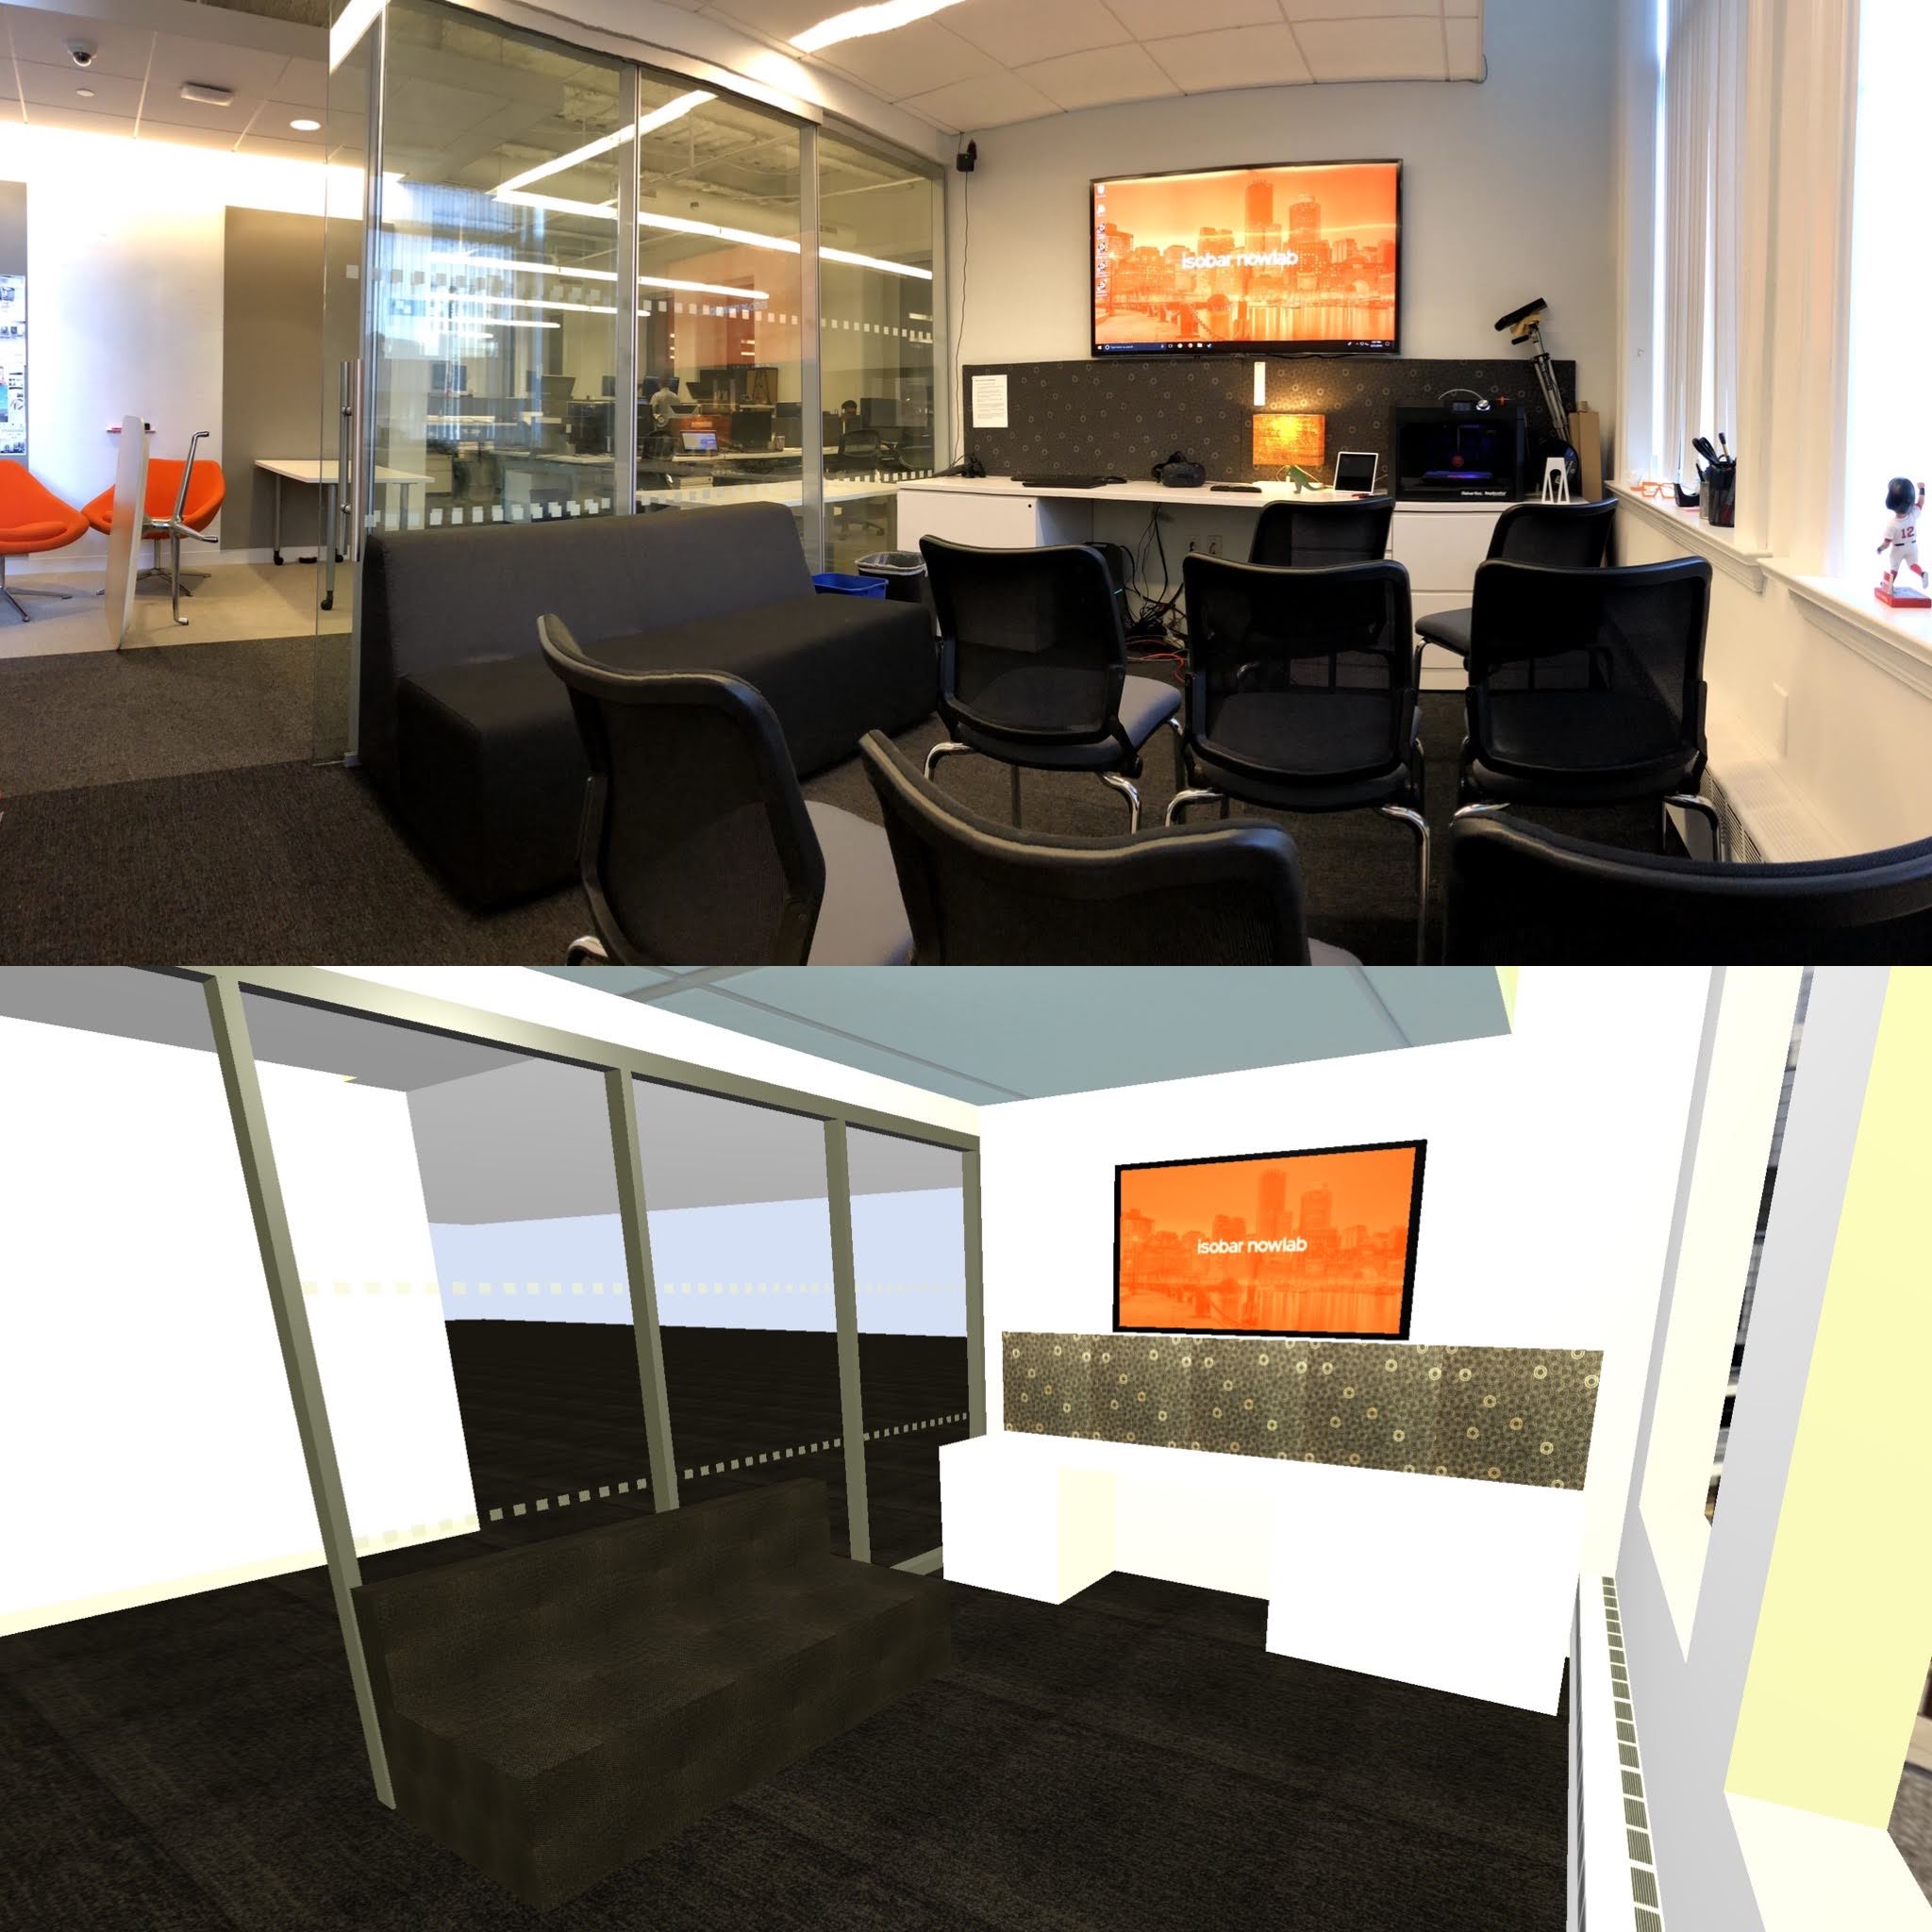 Comparison of a real photo of the NowLab room to the VR recreation